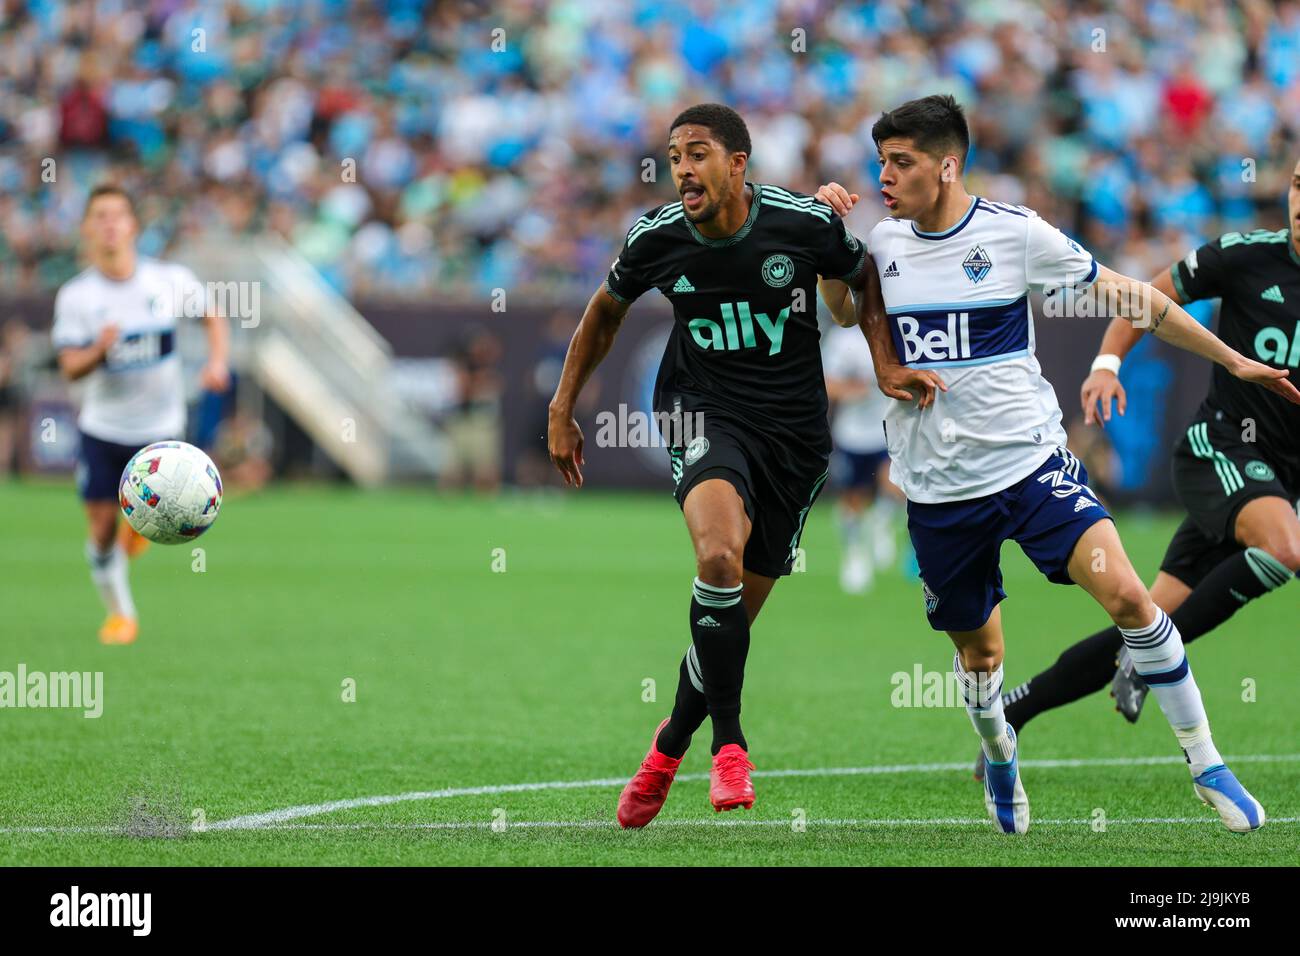 CHARLOTTE, NC - MAY 22: McKinze Gaines (17) of Charlotte FC and CristiÃ¡n GutiÃ©rrez (3) of Vancouver Whitecaps chase down a loose ball during a soccer match between the Charlotte FC and the Vancouver Whitecaps on May 22, 2022 at Bank of America Stadium in Charlotte, NC. (Credit Image: © David Jensen/Icon SMI via ZUMA Press) Stock Photo